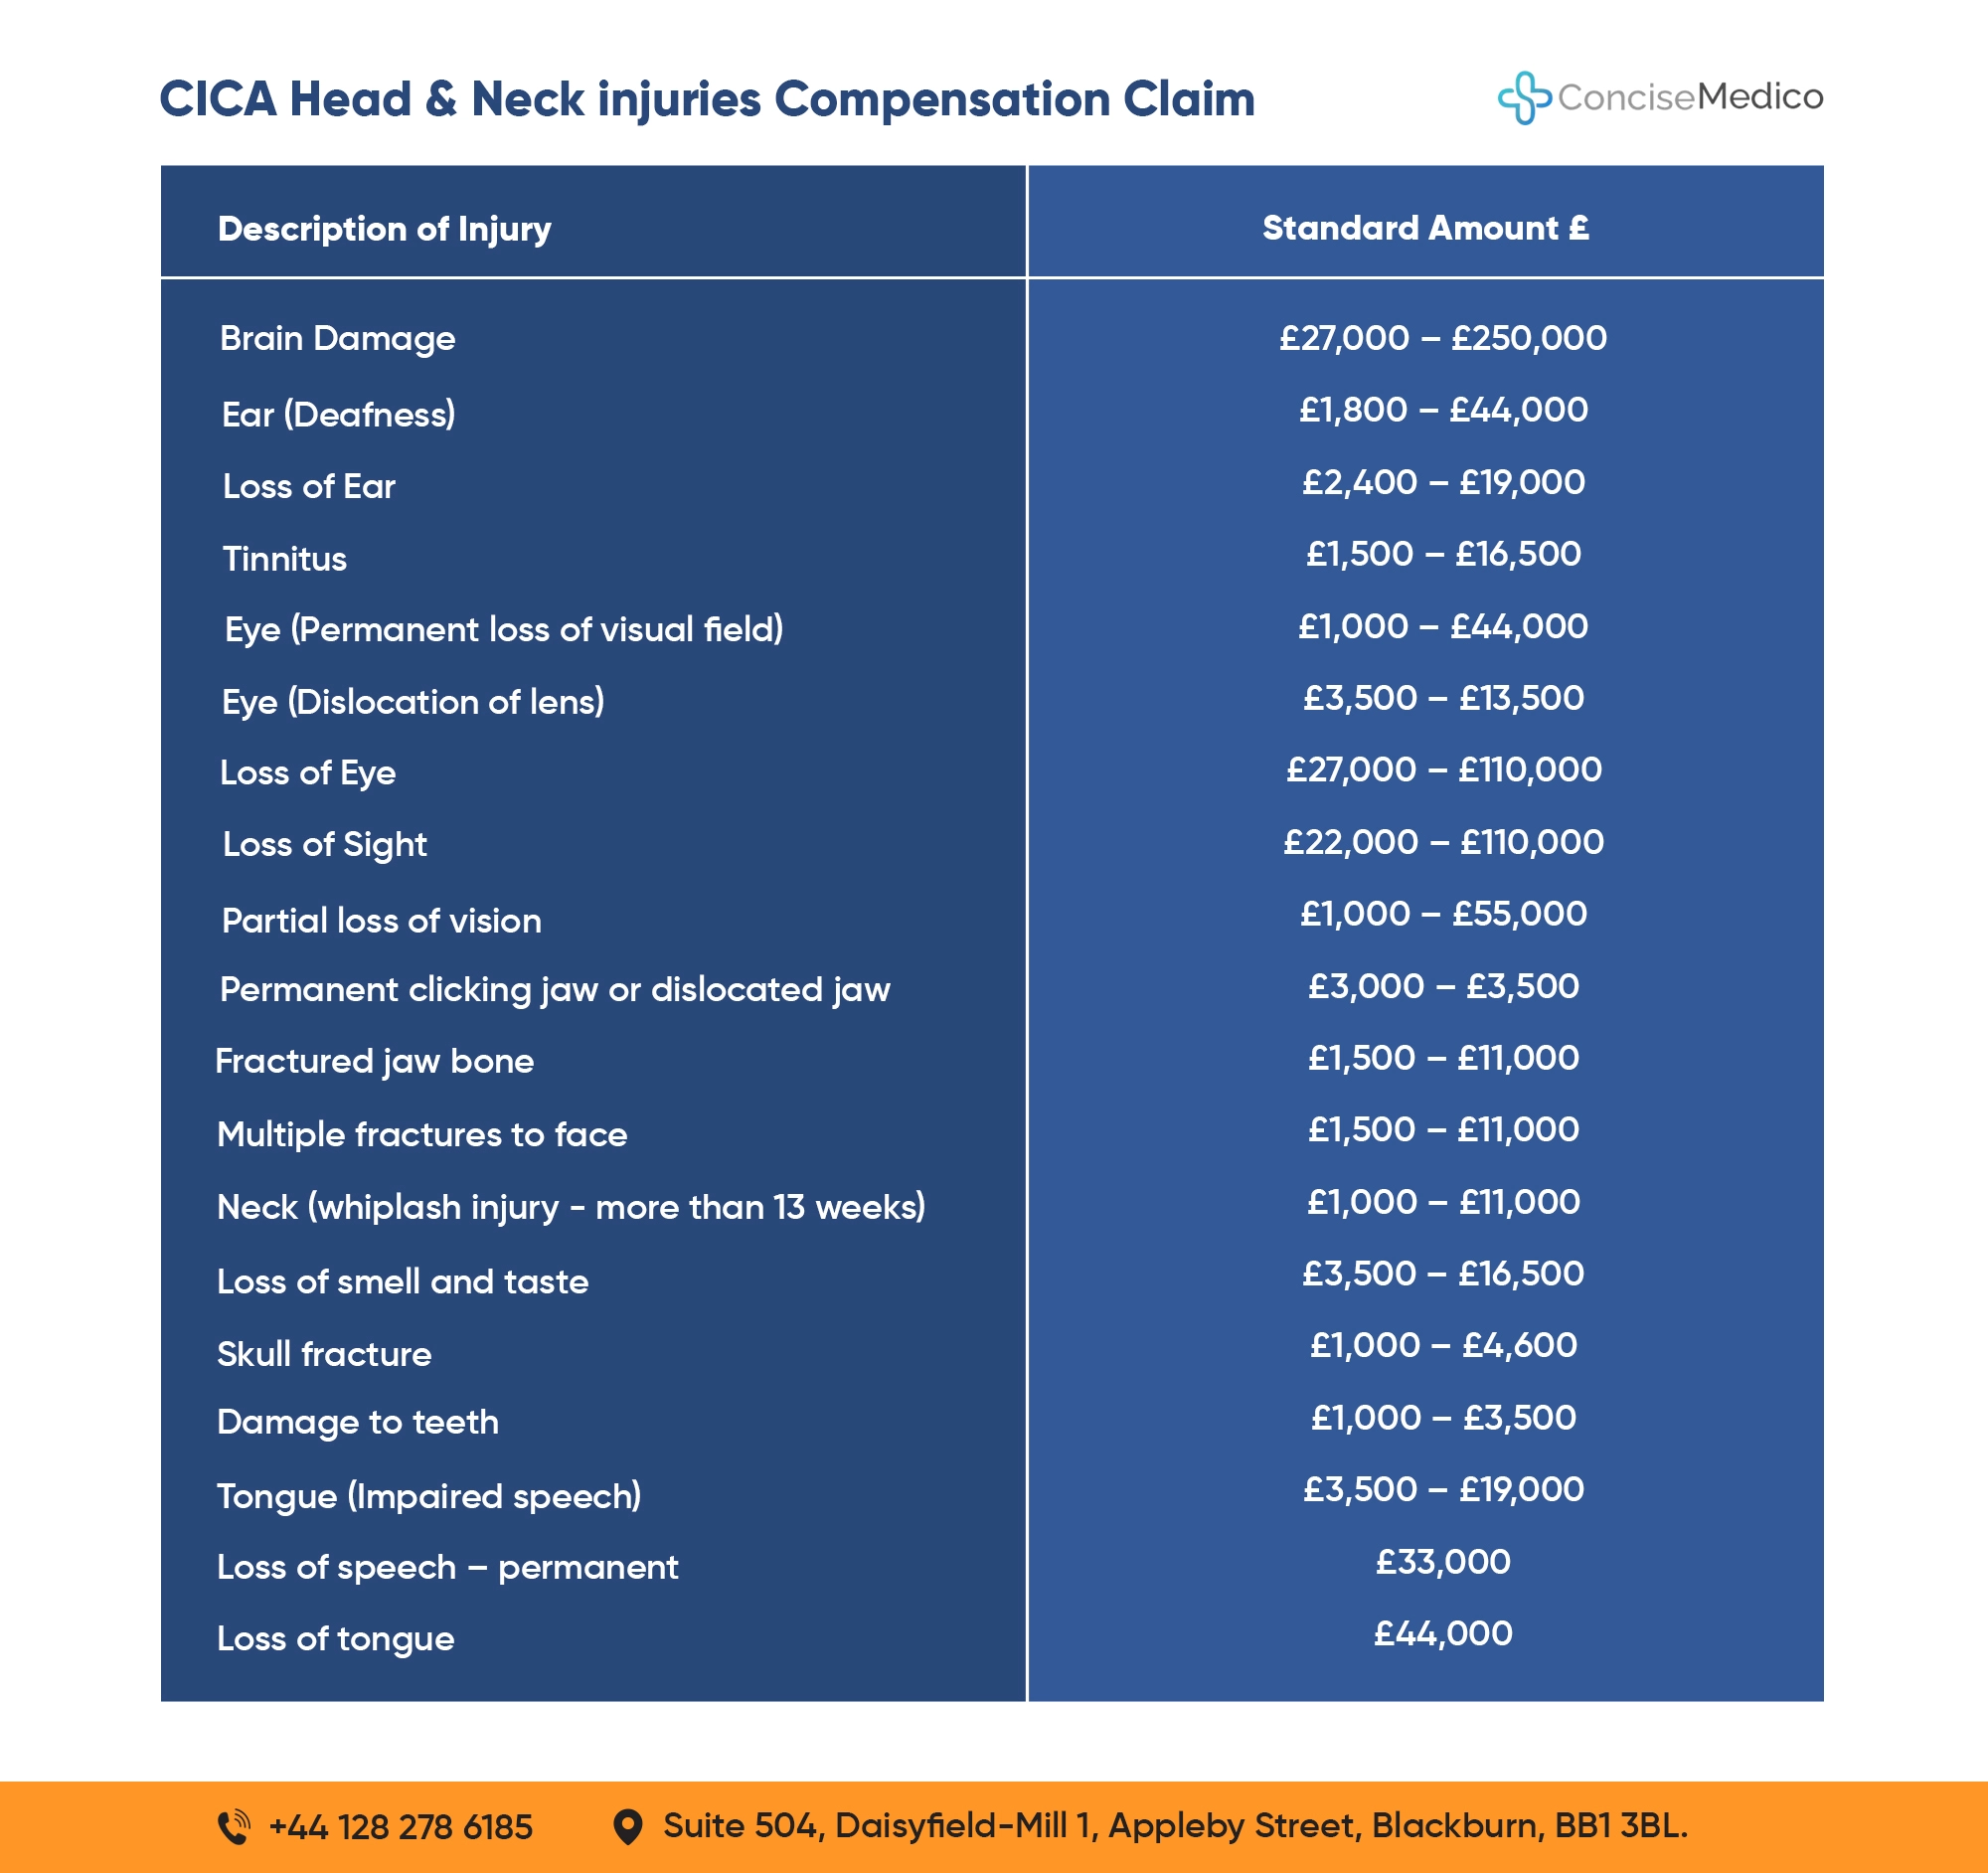 CICA Head and Neck Injuries Compensation Claim Amount